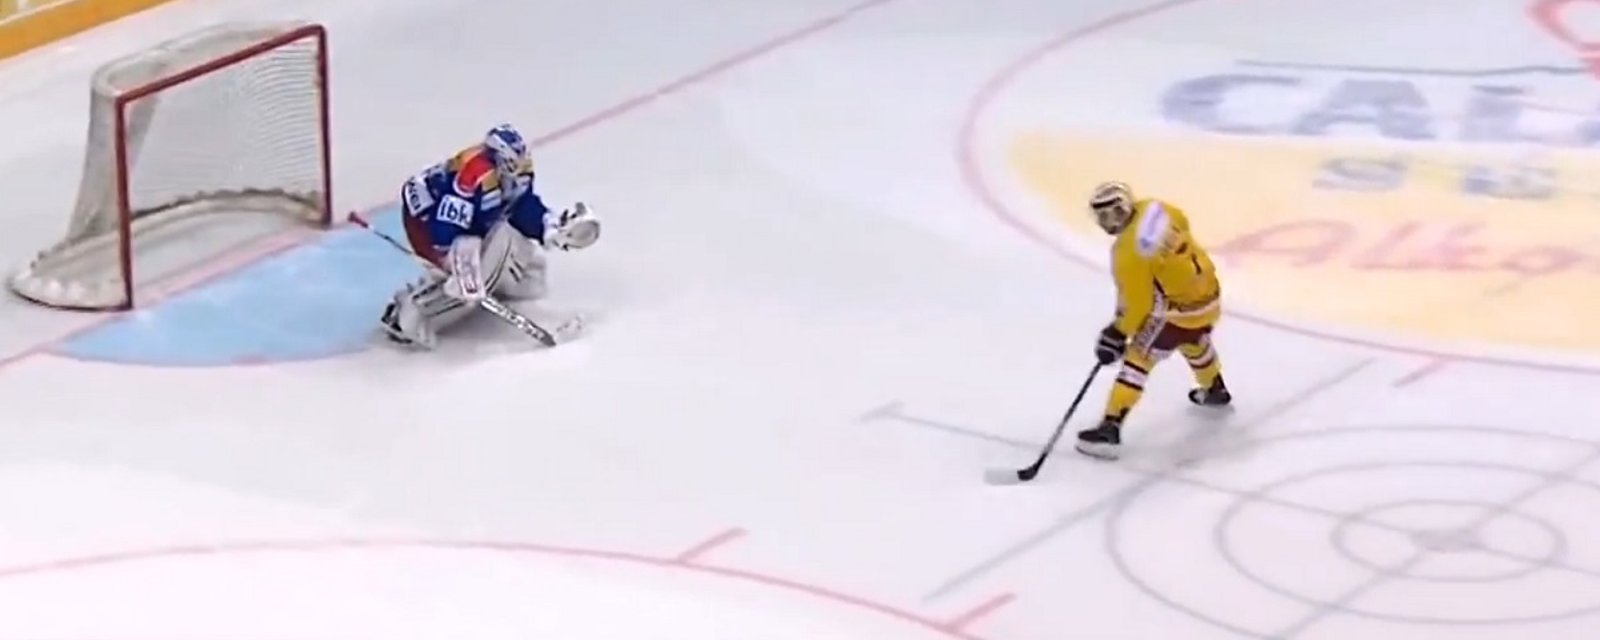 Former NHLer shows off his filthy moves in the shoot out.